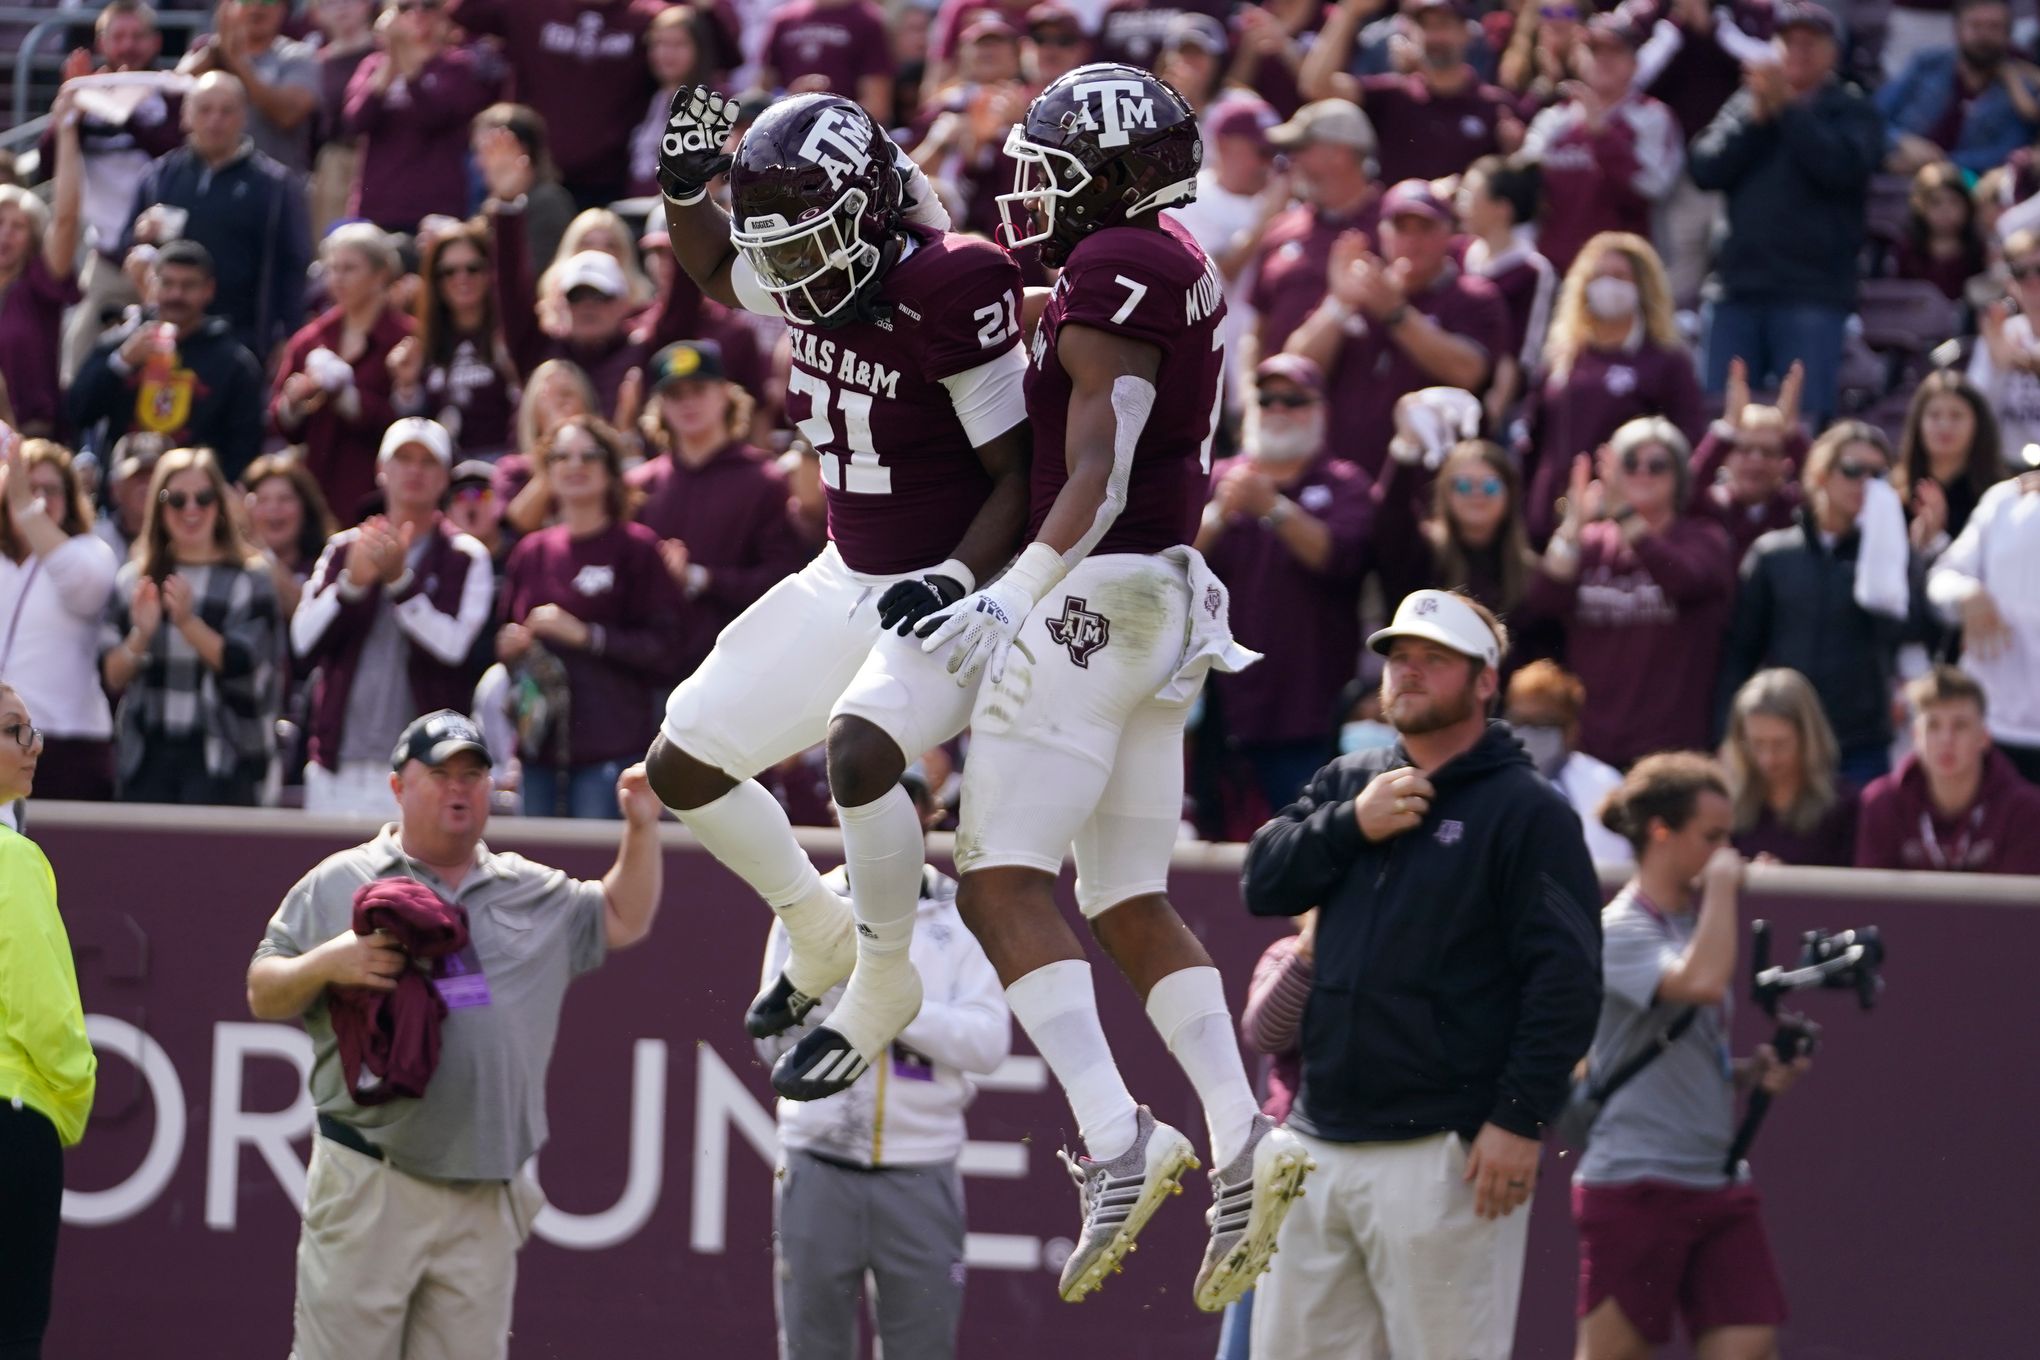 Texas A&M Aggies vs. LSU Tigers Week 13: Offensive Players to